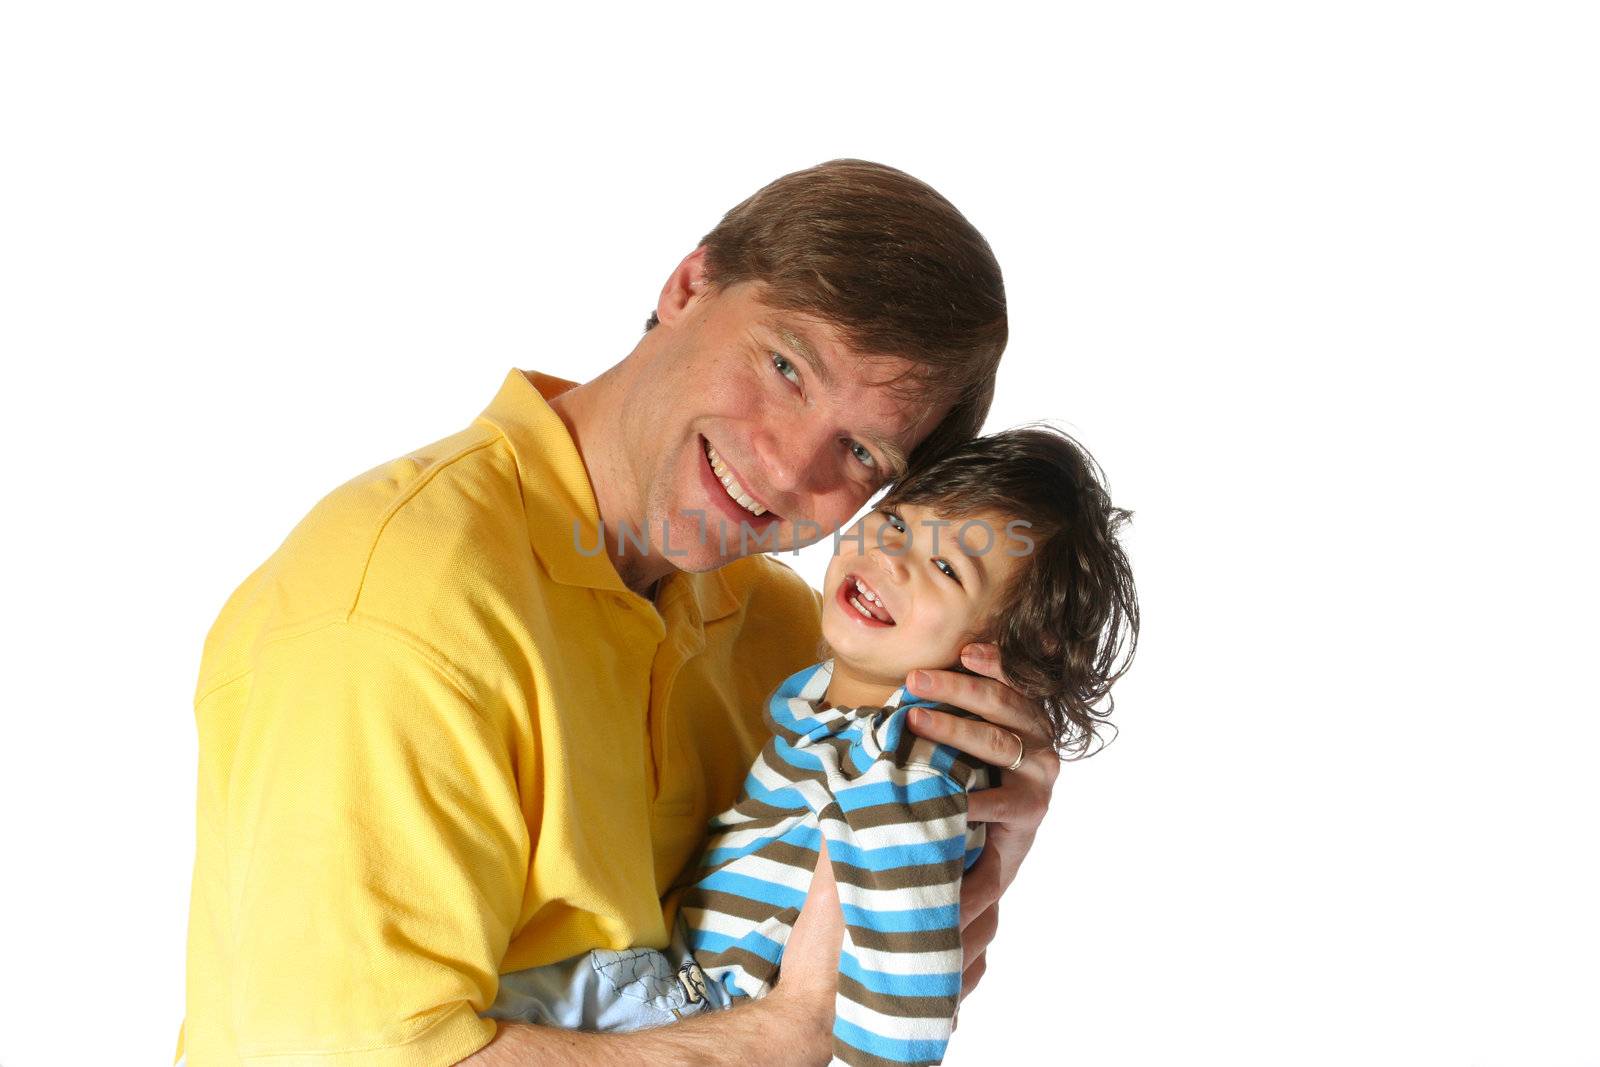 Handsome father holding his toddler son, isolated on white.